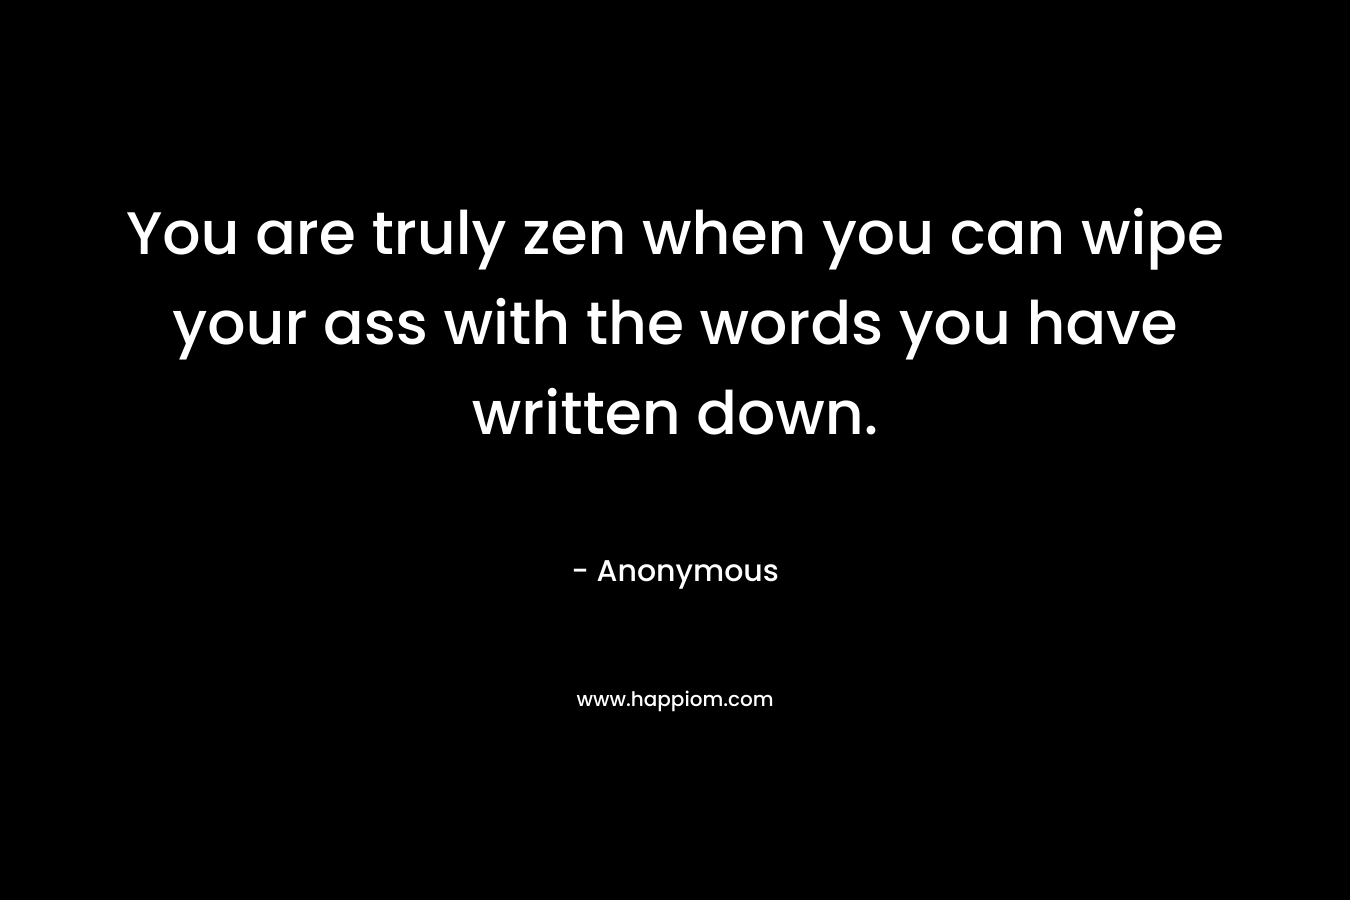 You are truly zen when you can wipe your ass with the words you have written down. – Anonymous